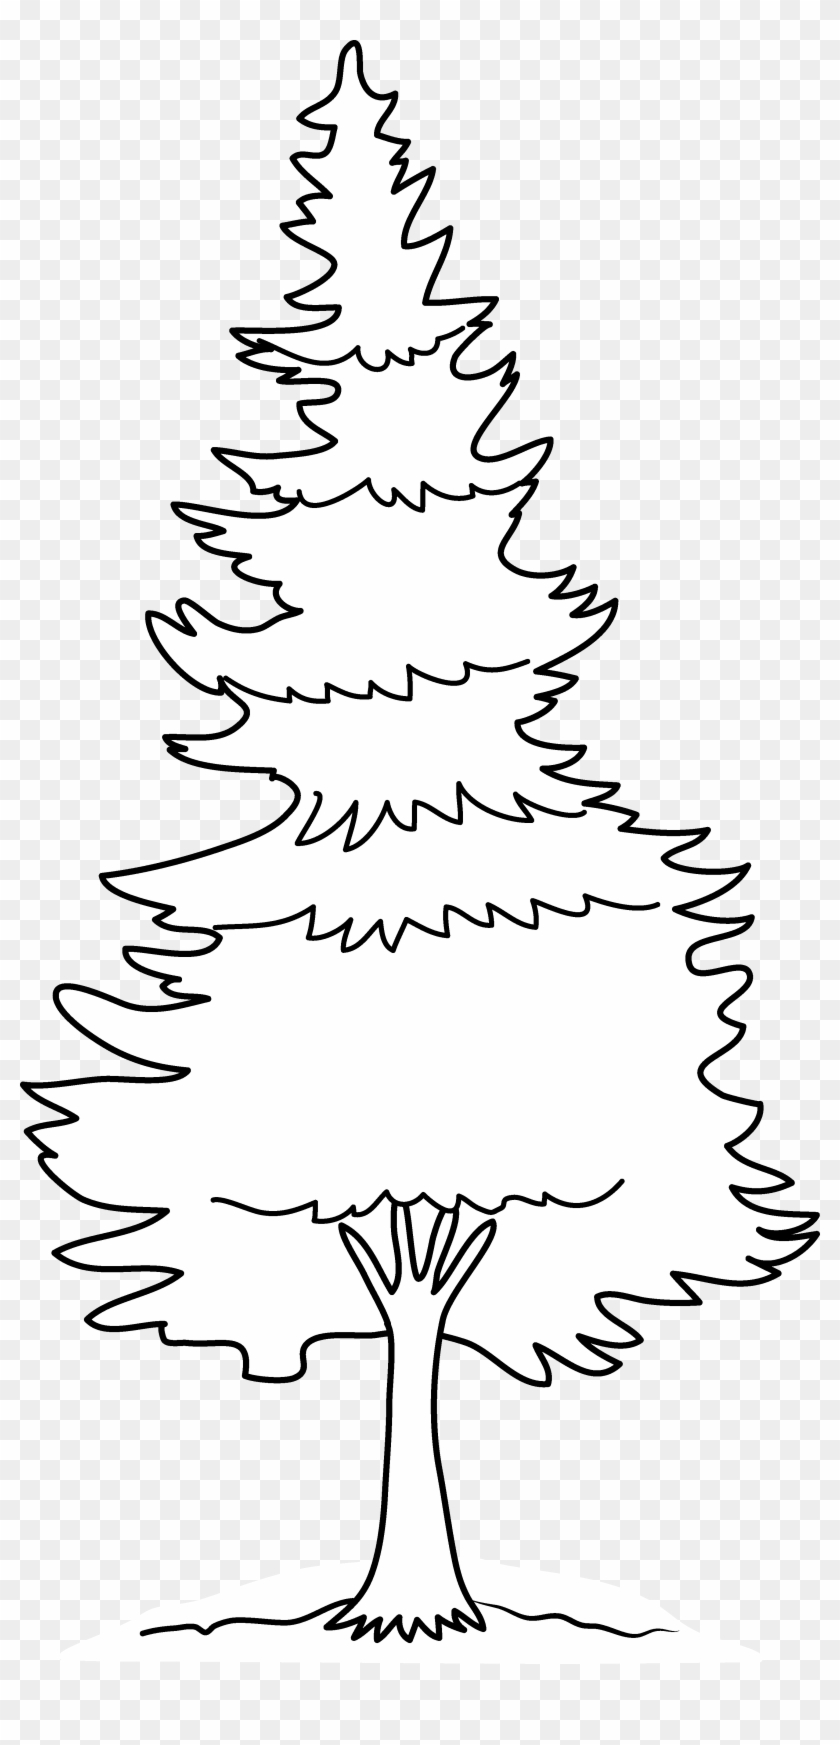 Pine Tree Coloring Page Free Clip Art - Pine #1023002